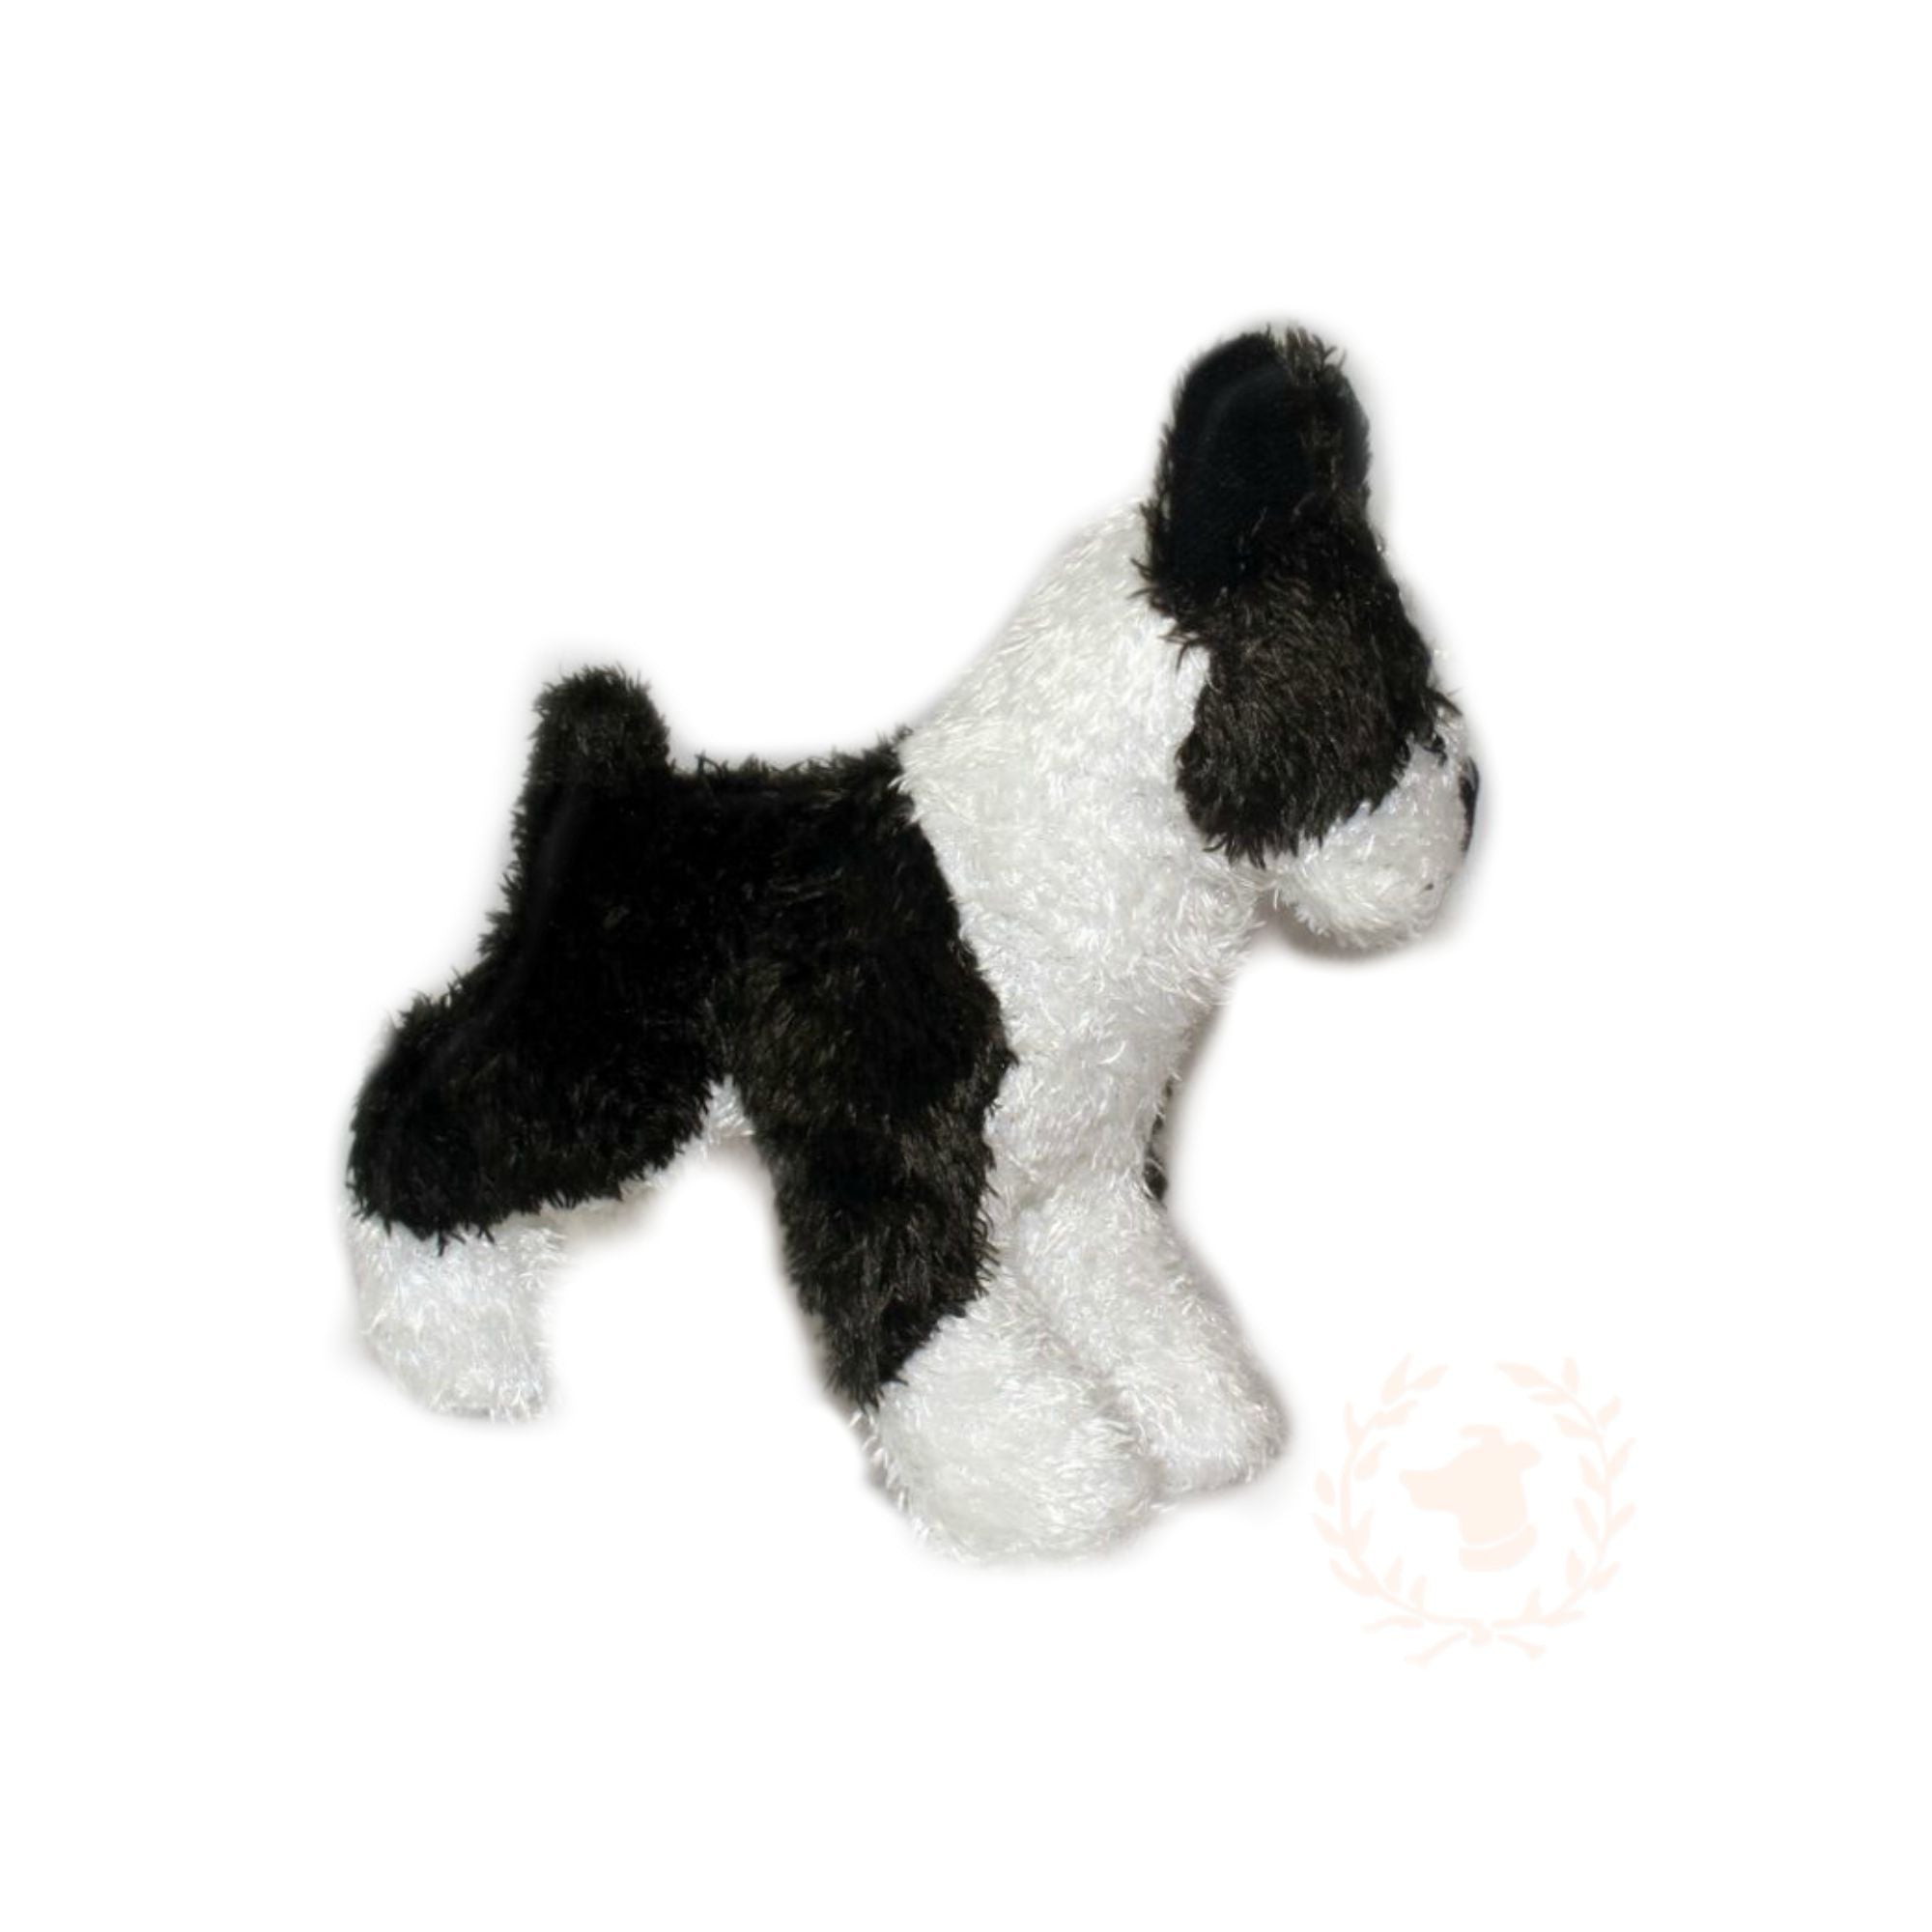 Musical Toy - Interactive Toy - Boston Terrier Toy - Dog Toy